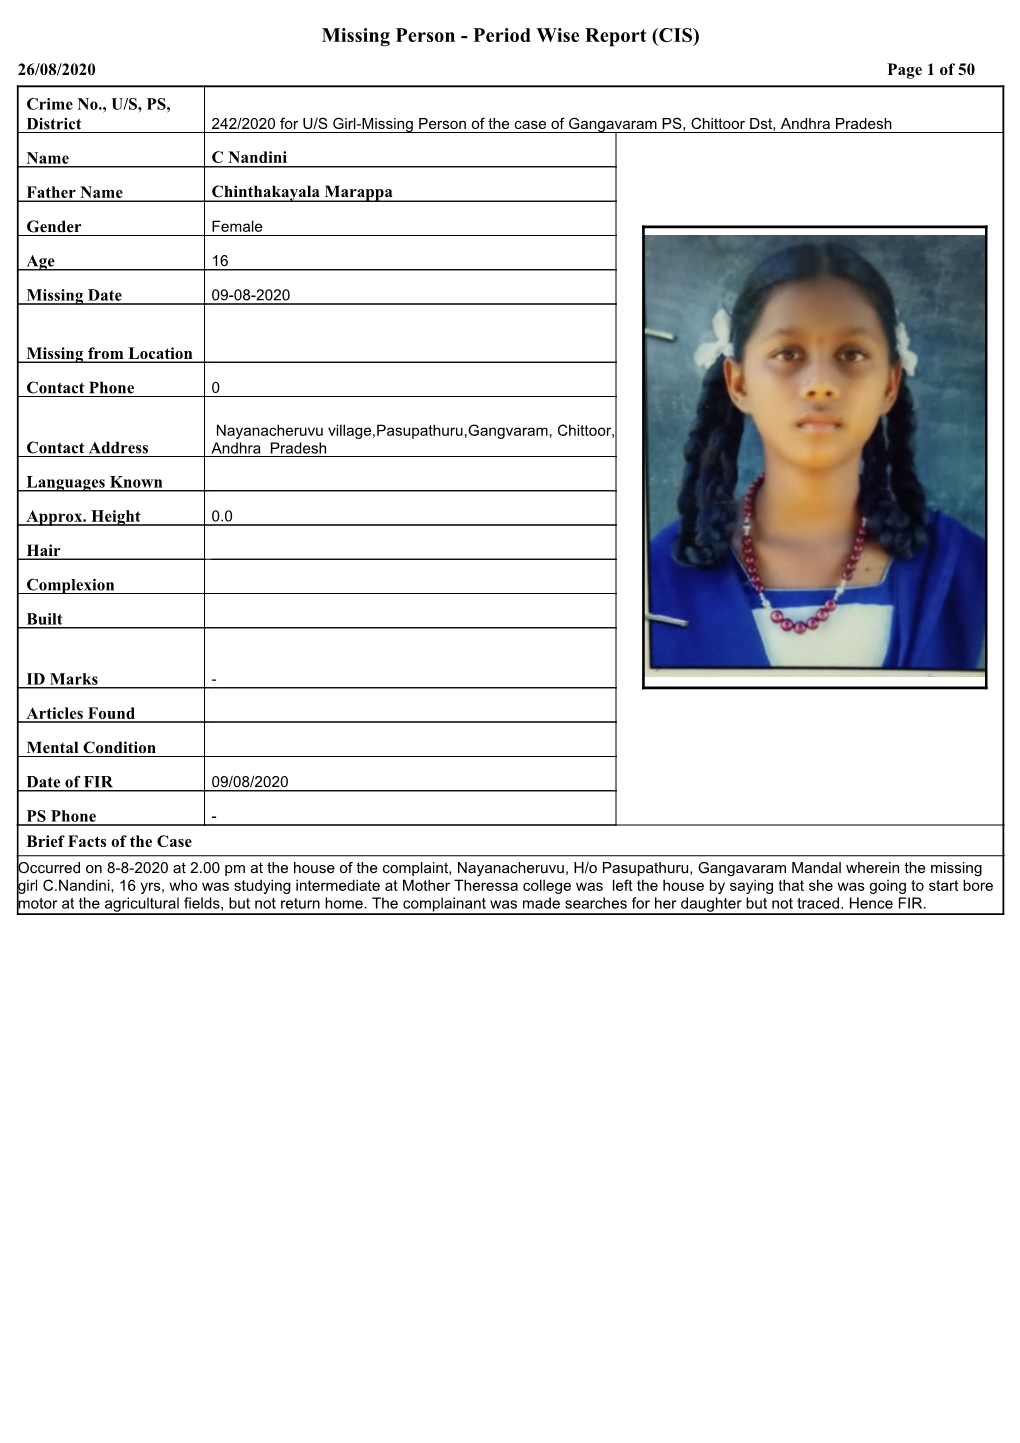 Missing Person - Period Wise Report (CIS) 26/08/2020 Page 1 of 50